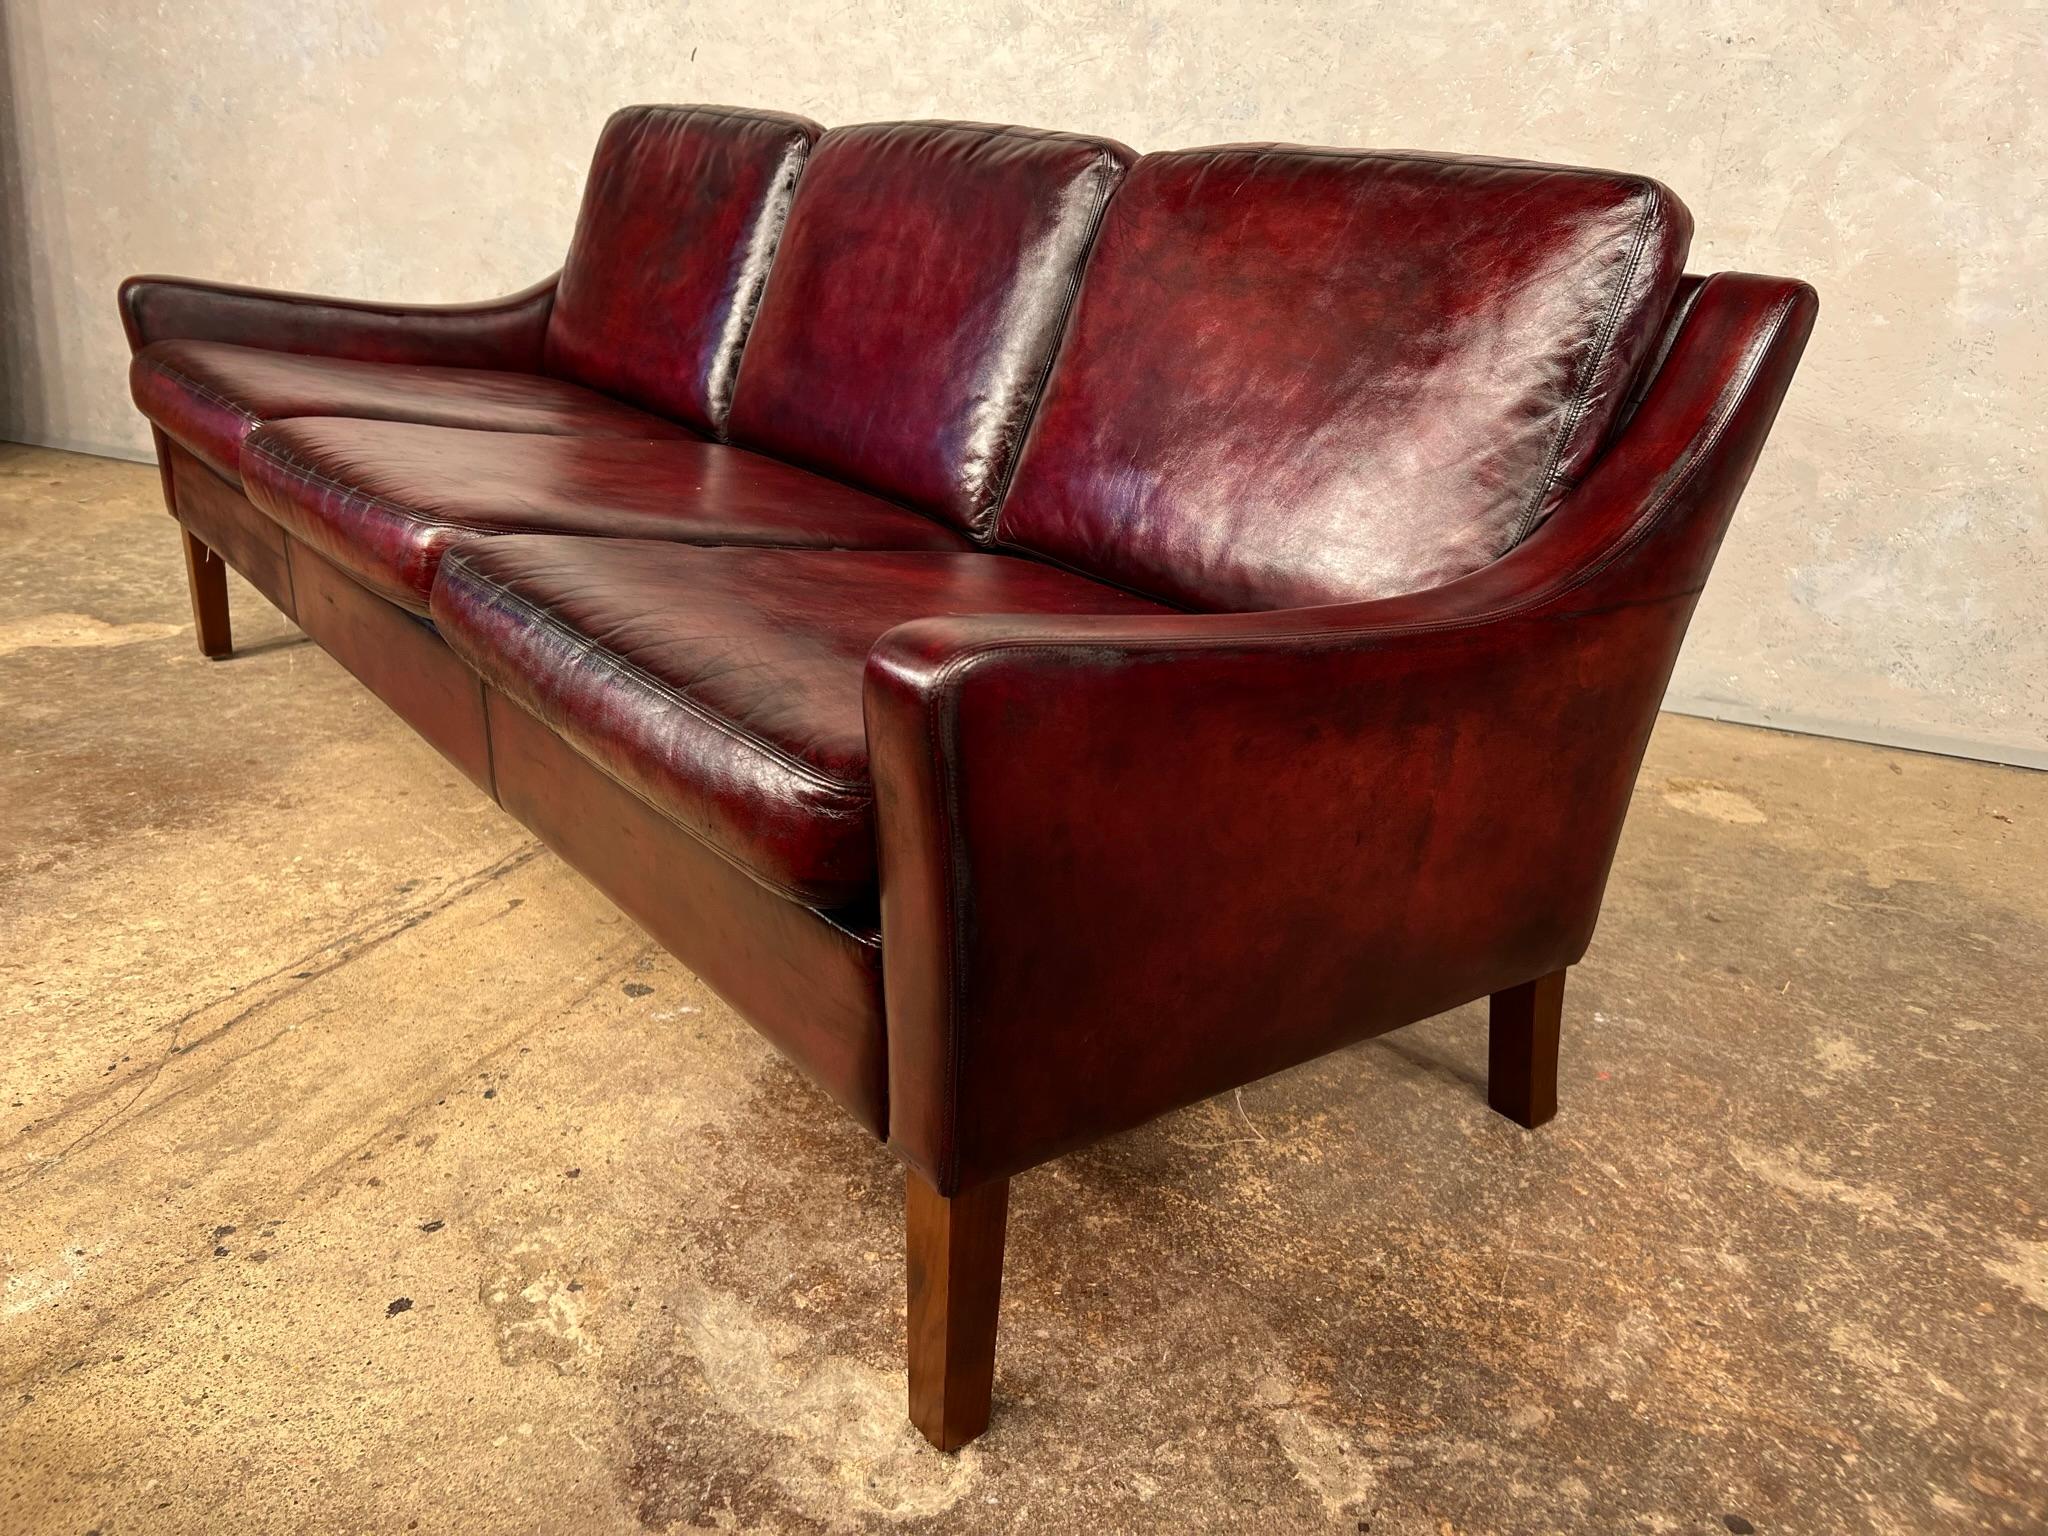 A Compact Vintage Danish 1970s Deep Red Three Seater Leather Sofa For Sale 3